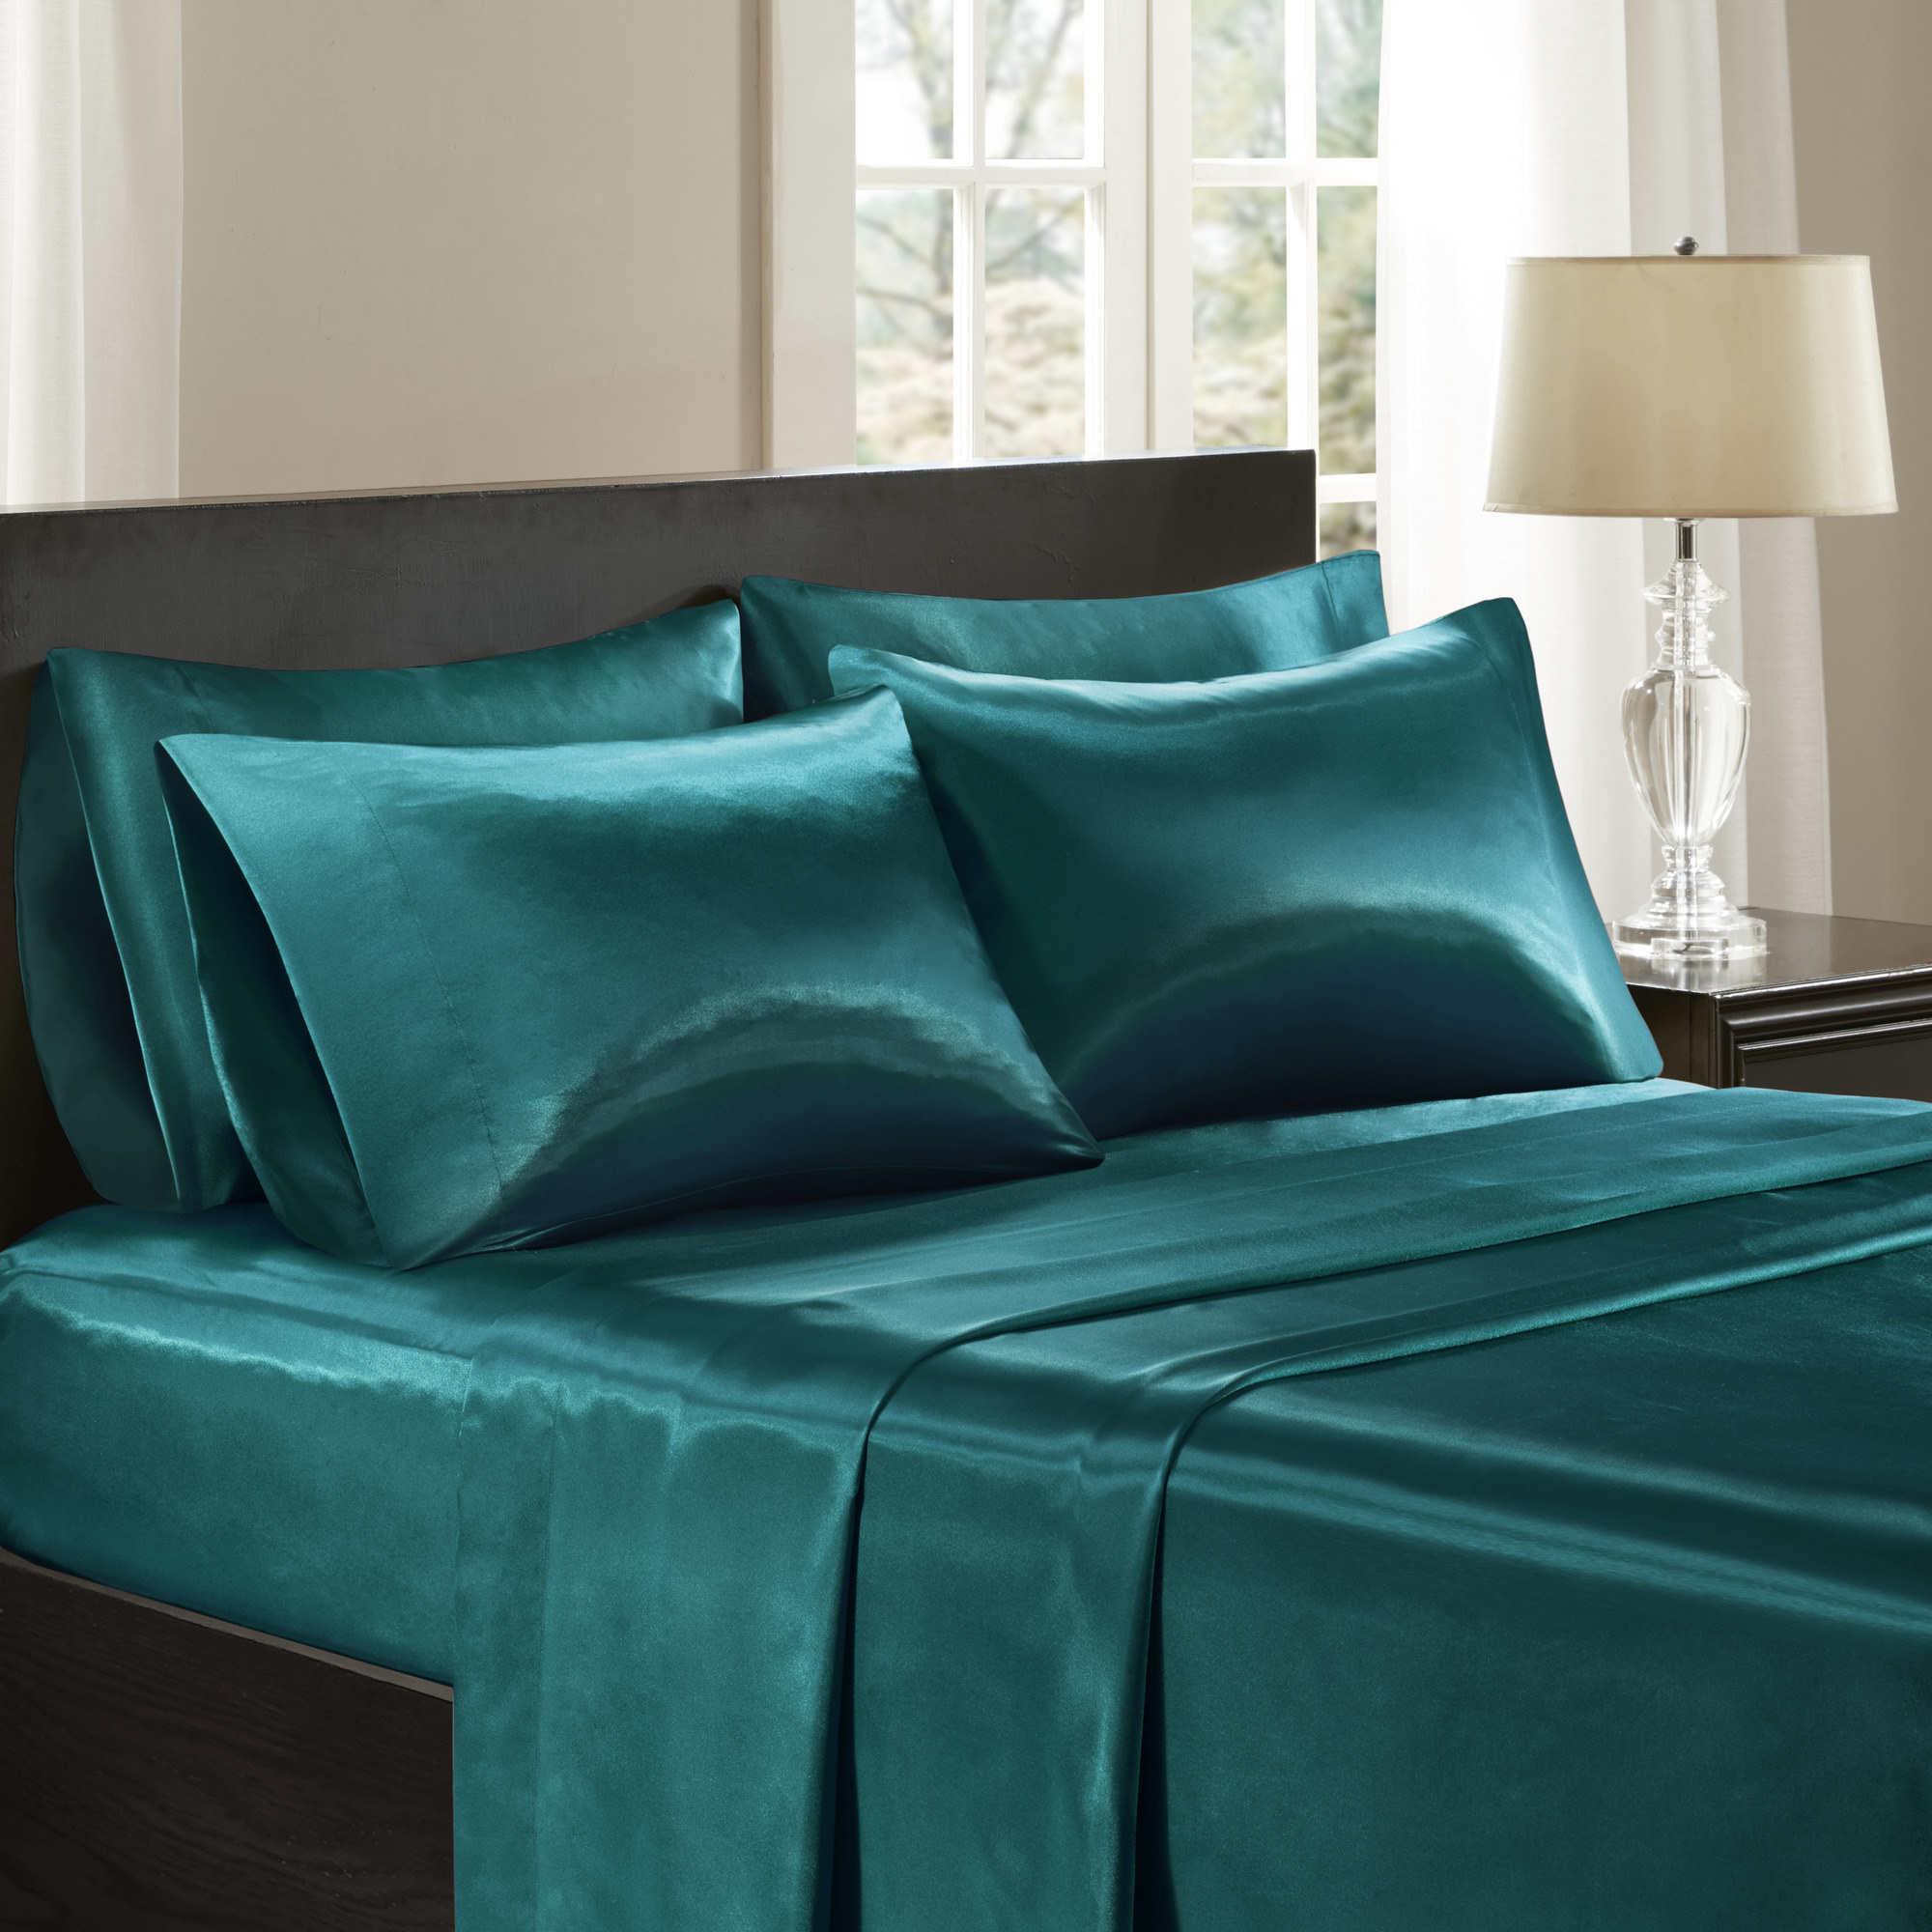 The sheets in emerald, looking flawless